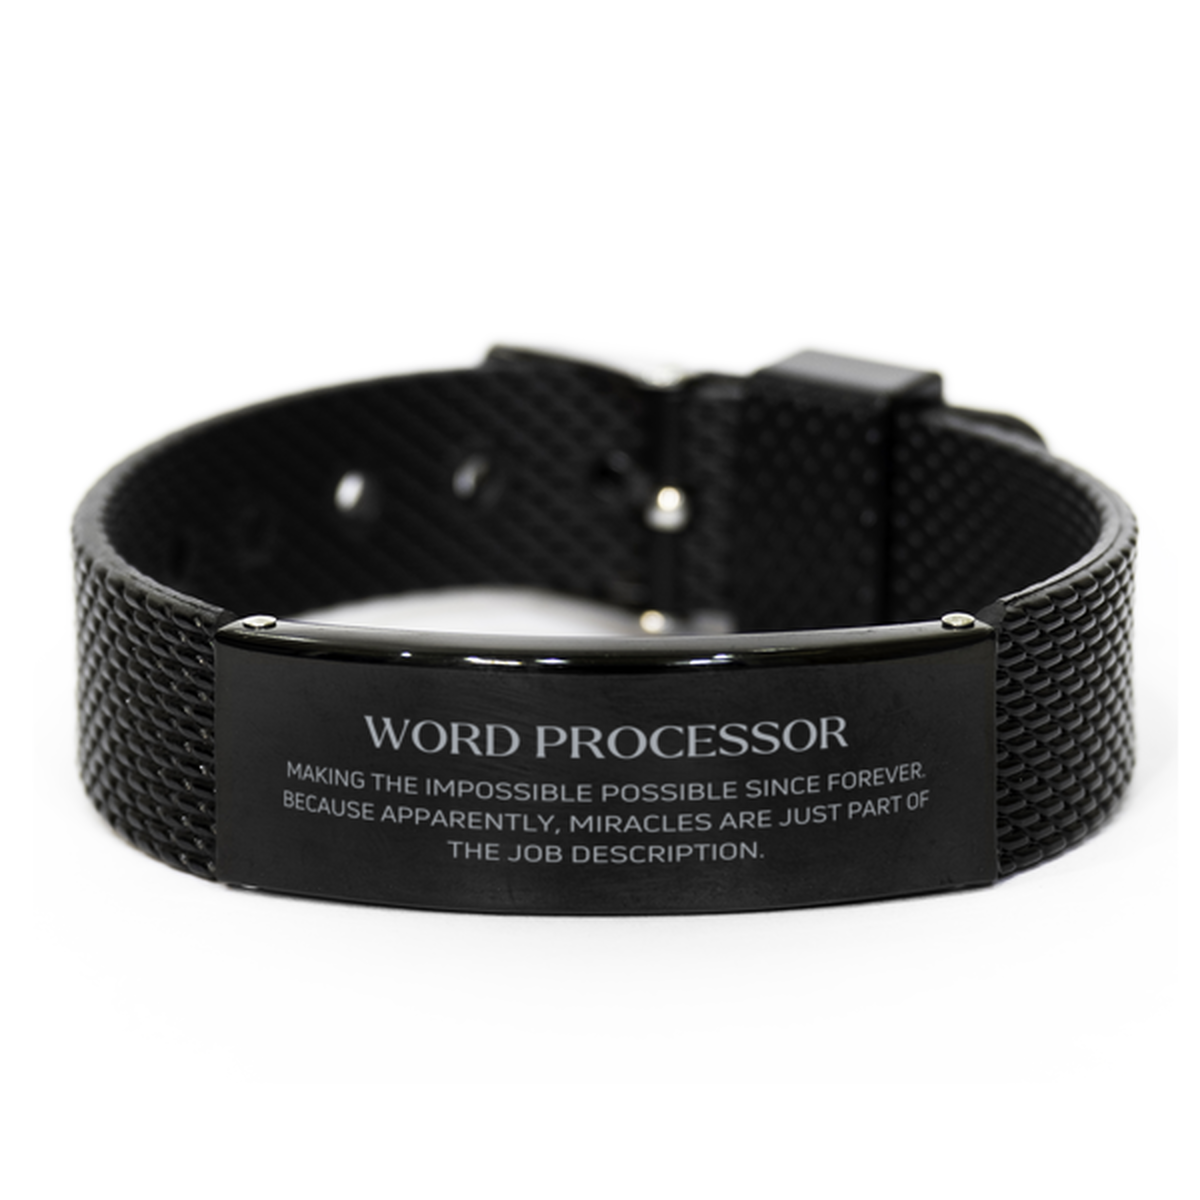 Funny Word Processor Gifts, Miracles are just part of the job description, Inspirational Birthday Black Shark Mesh Bracelet For Word Processor, Men, Women, Coworkers, Friends, Boss